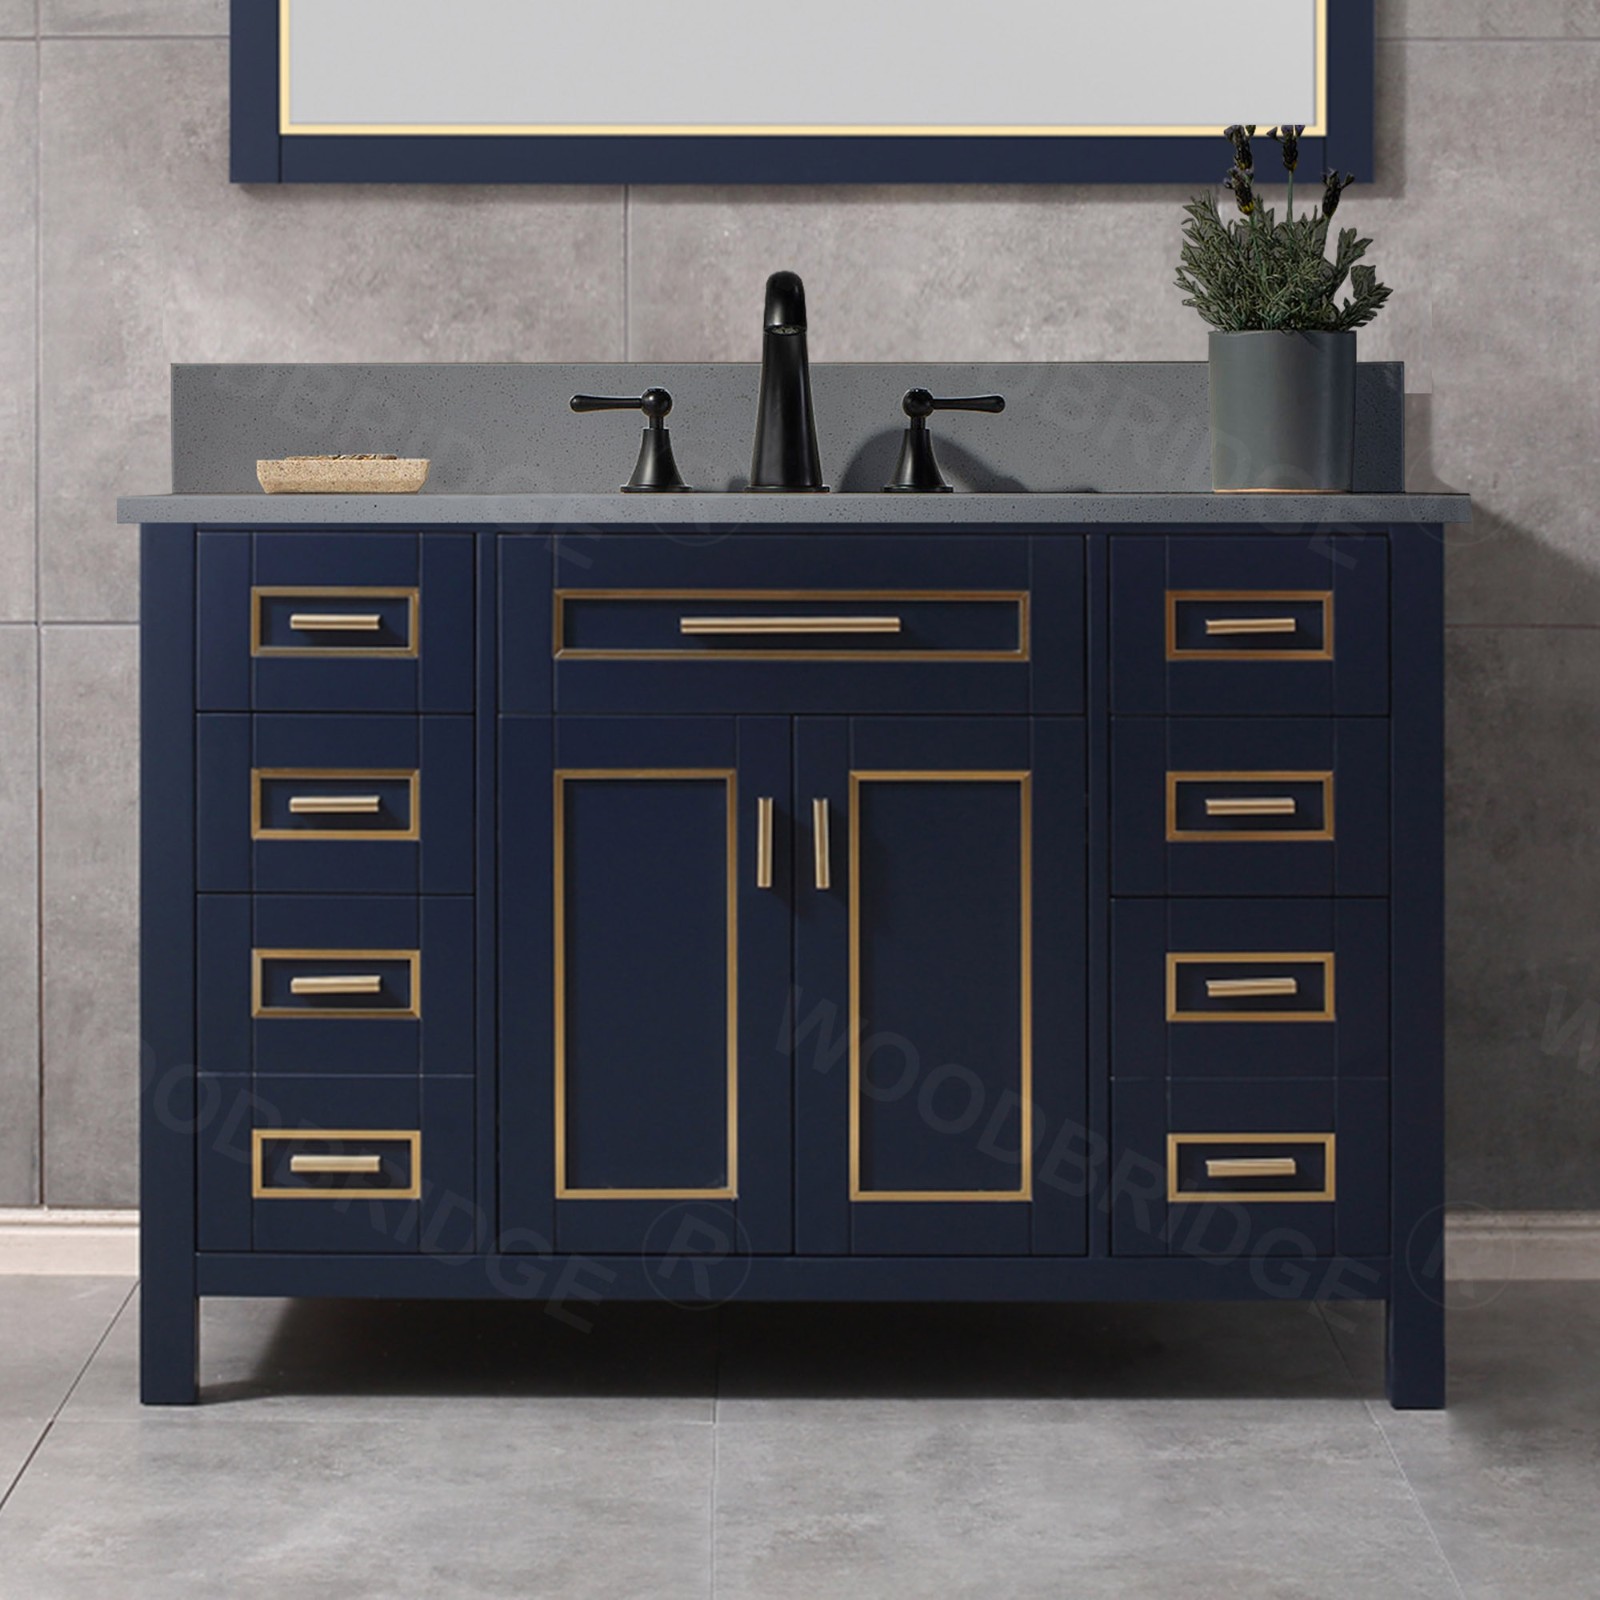  WOODBRIDGE Milan  49” Floor Mounted Single Basin Vanity Set with Solid Wood Cabinet in Navy Blue and Engineered stone composite Vanity Top in Dark Gray with Pre-installed Undermount Rectangle Bathroom Sink and Pre-Drilled 3-Hole for 8-inch Widespread Fauc_4723